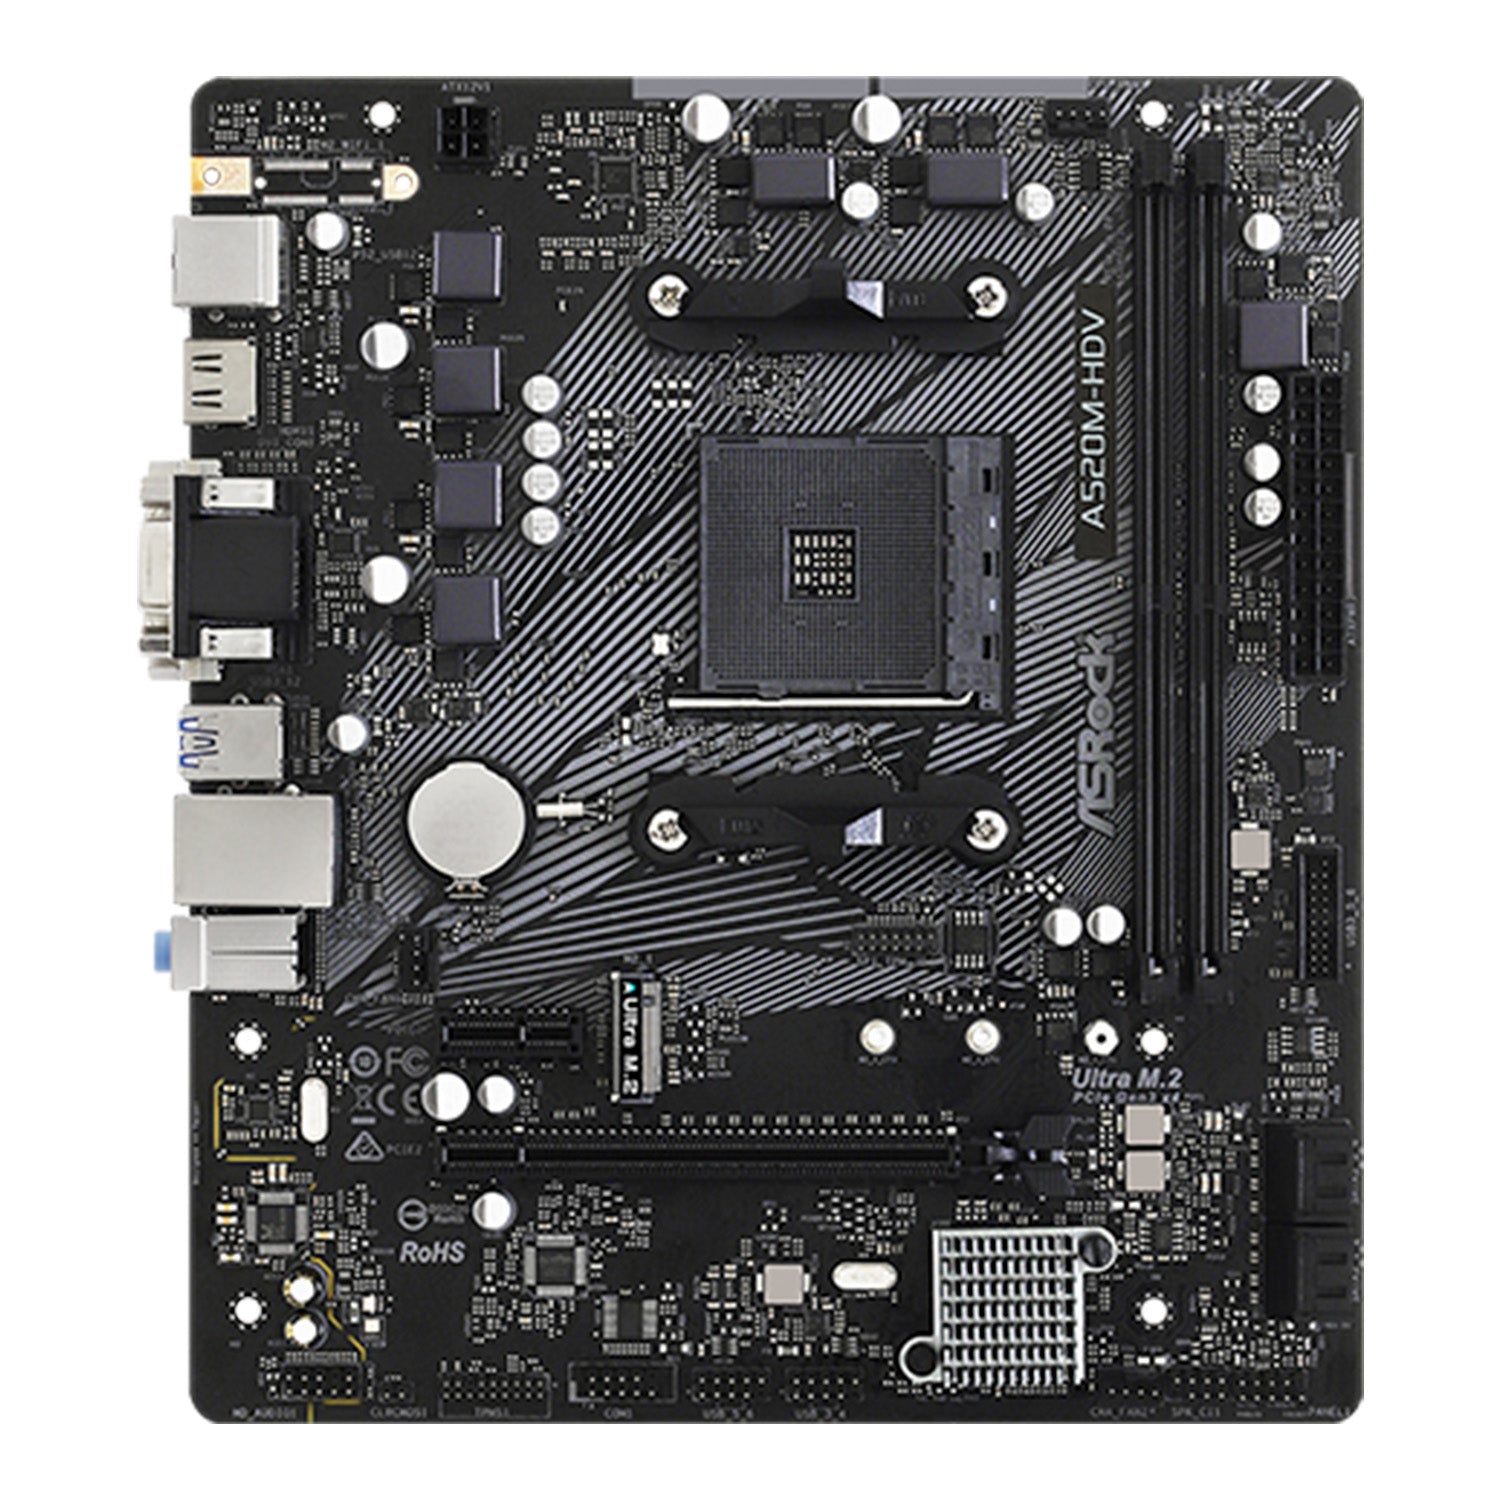 ASRock A520M-HDV AMD AM4 micro ATX motherboard with DDR4 4600MHz, Ultra M.2, USB 3.2 Gen 2 ports, SATA 6 Gbps